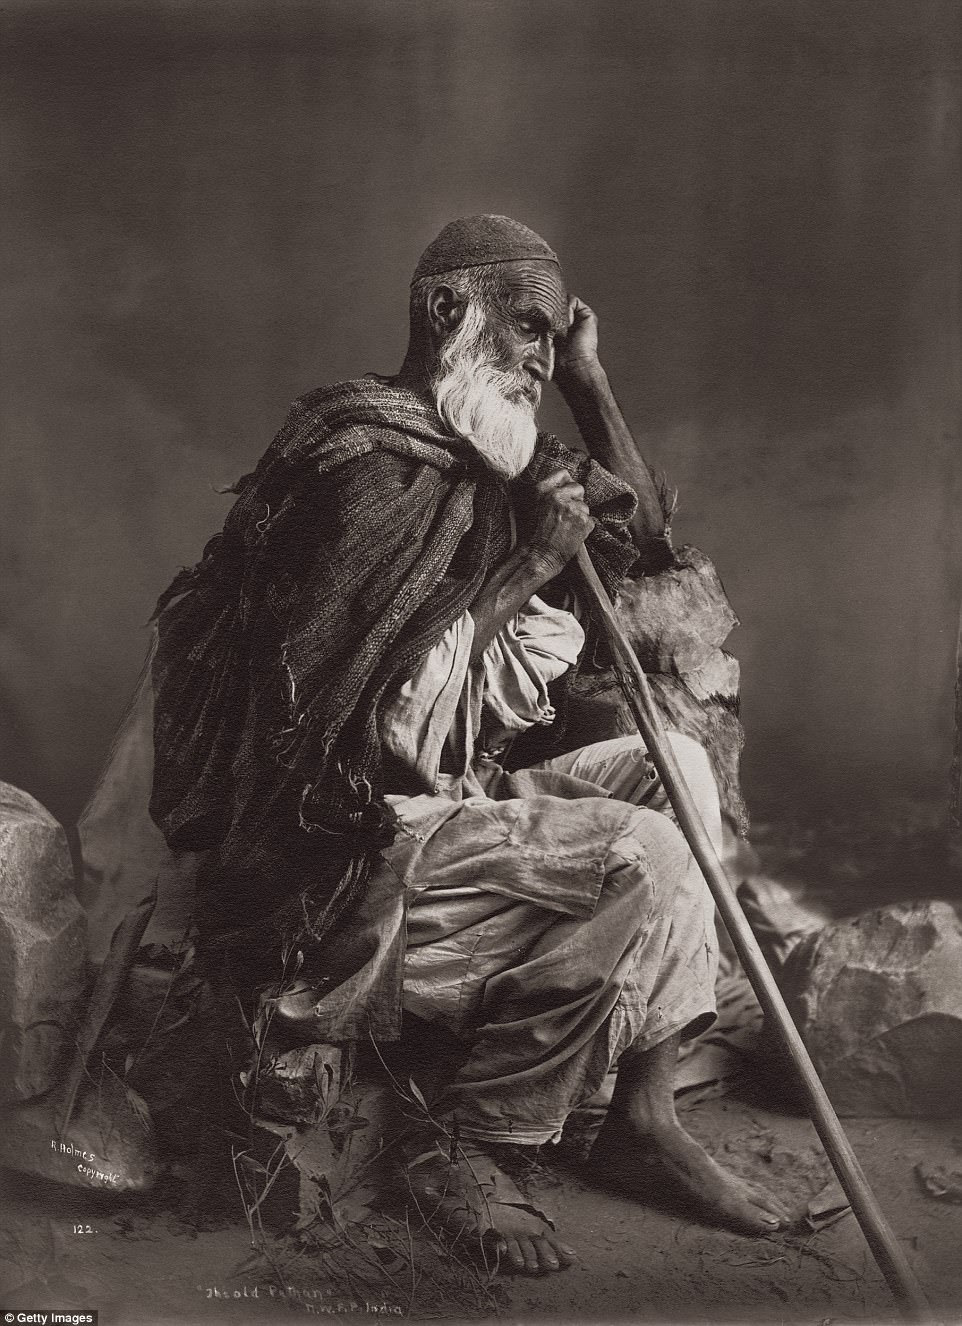 This elderly Pathan, or Pashtun man was photographed in what is now Pakistan in British India in 1915, seen here on silver gelatin print. The Pashtun tribe is known for its emphasis on the nobility of endeavours both militaristic and poetic